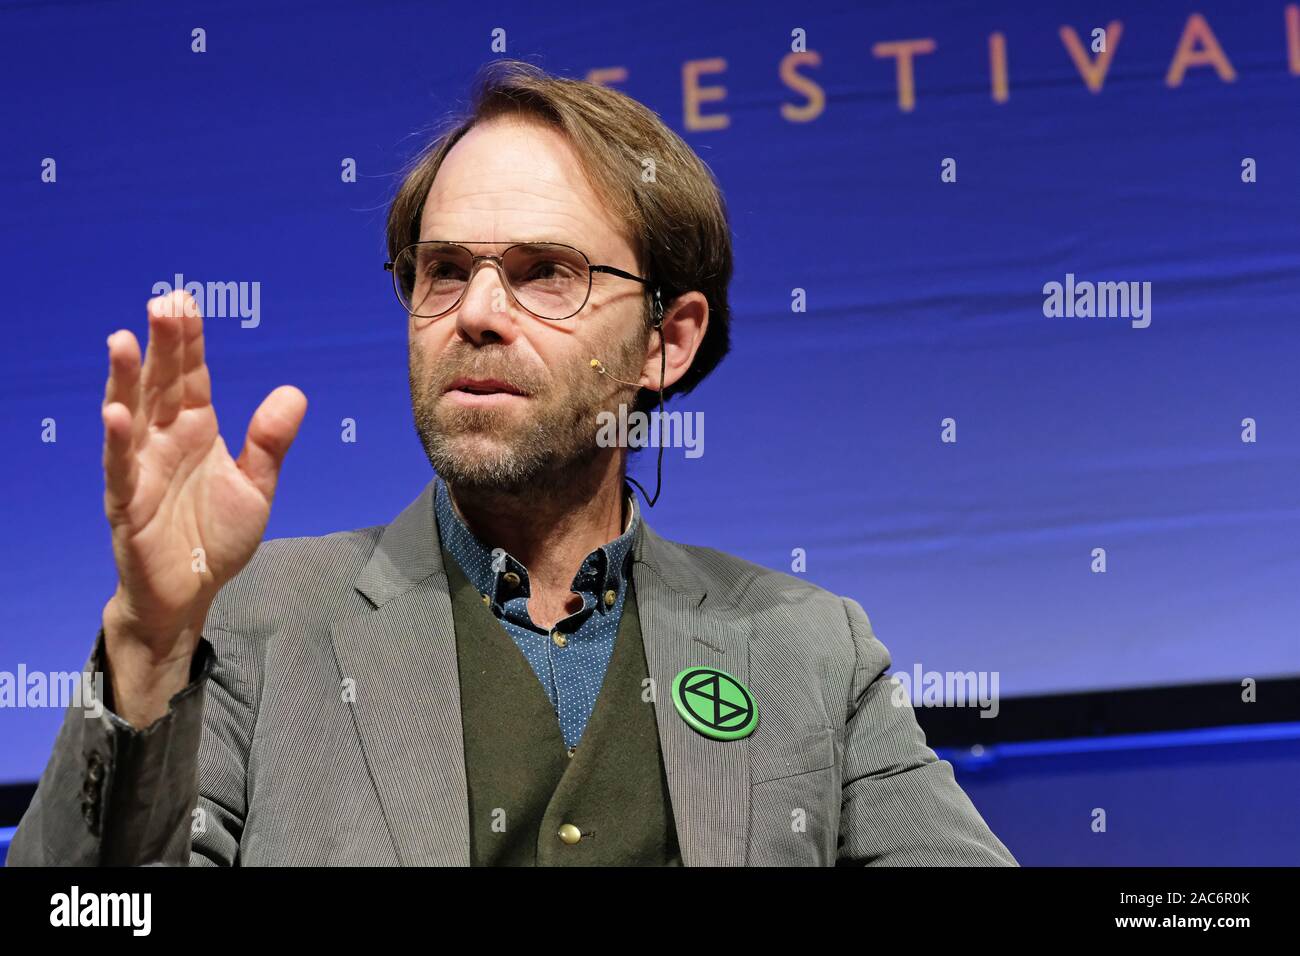 Hay Festival Winter Weekend , Hay on Wye, Powys, Wales, UK - Sunday 1st December 2019 - Rupert Read Extinction Rebellion ( XR ) spokesman on stage talking about the climate emergency at the Hay Festival Winter Weekend at 1pm. Photo Steven May / Alamy Live News Stock Photo